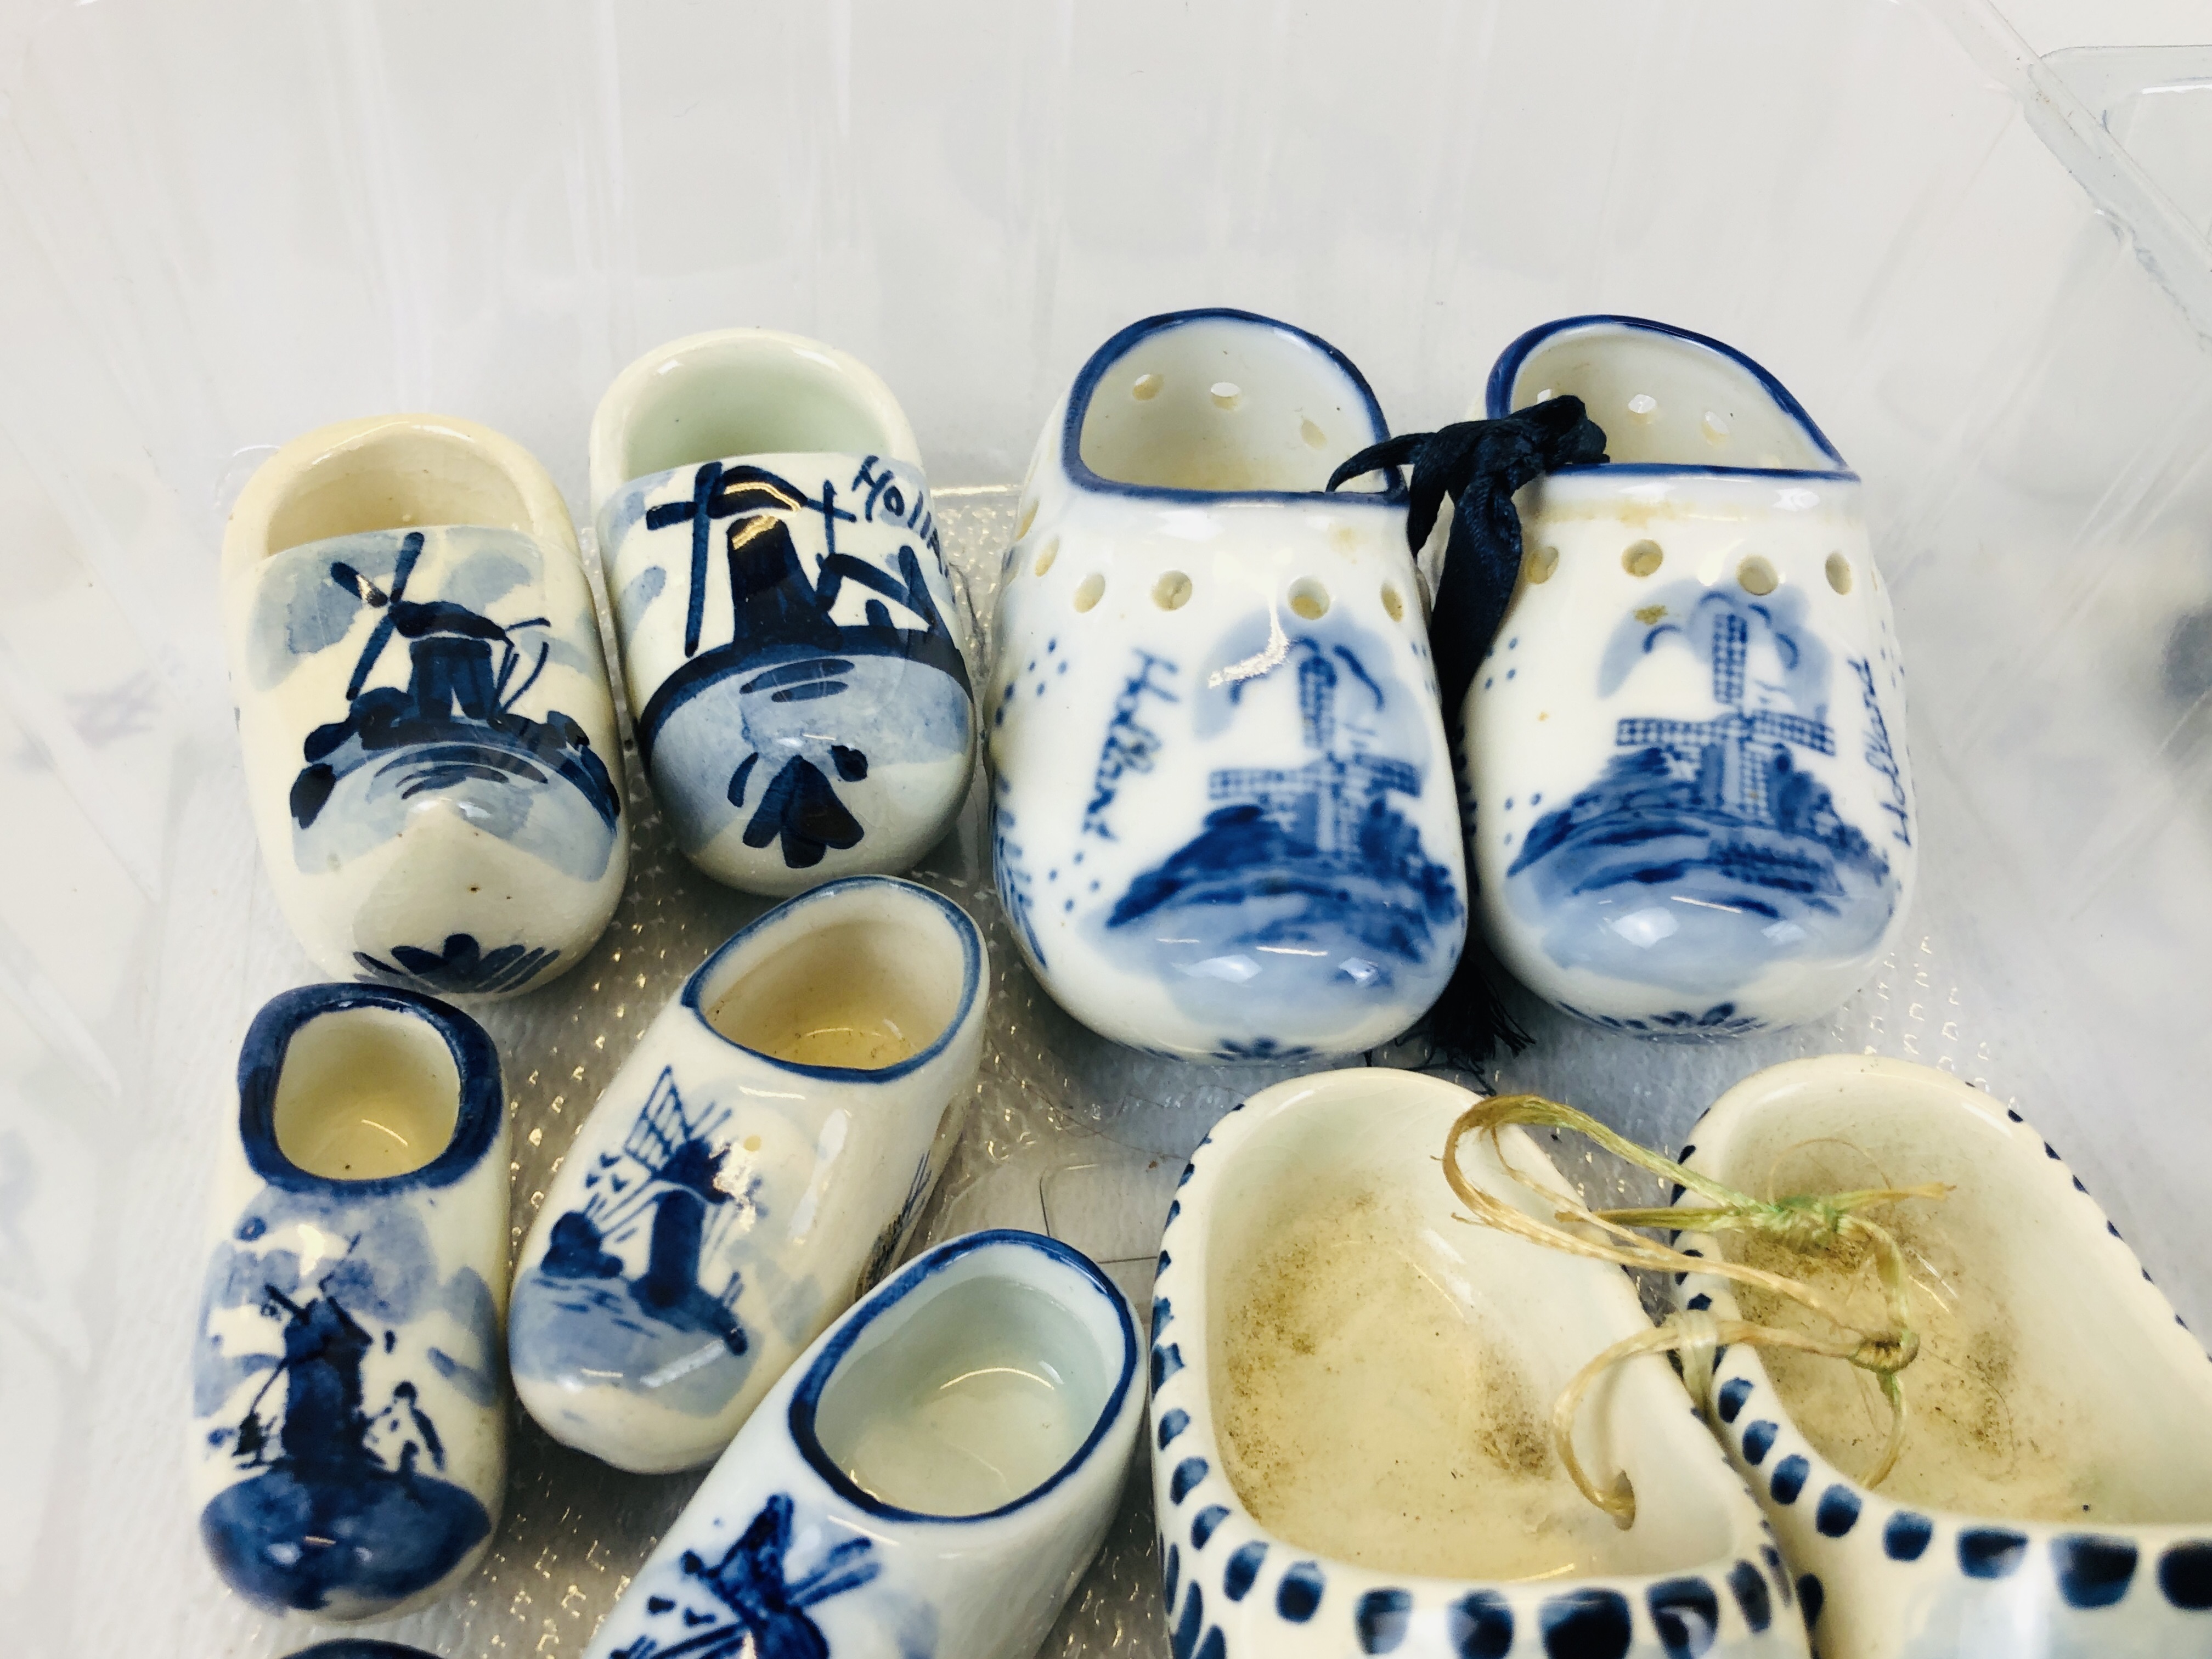 AN EXTENSIVE COLLECTION OF MINIATURE DELFT CLOGS. - Image 5 of 9